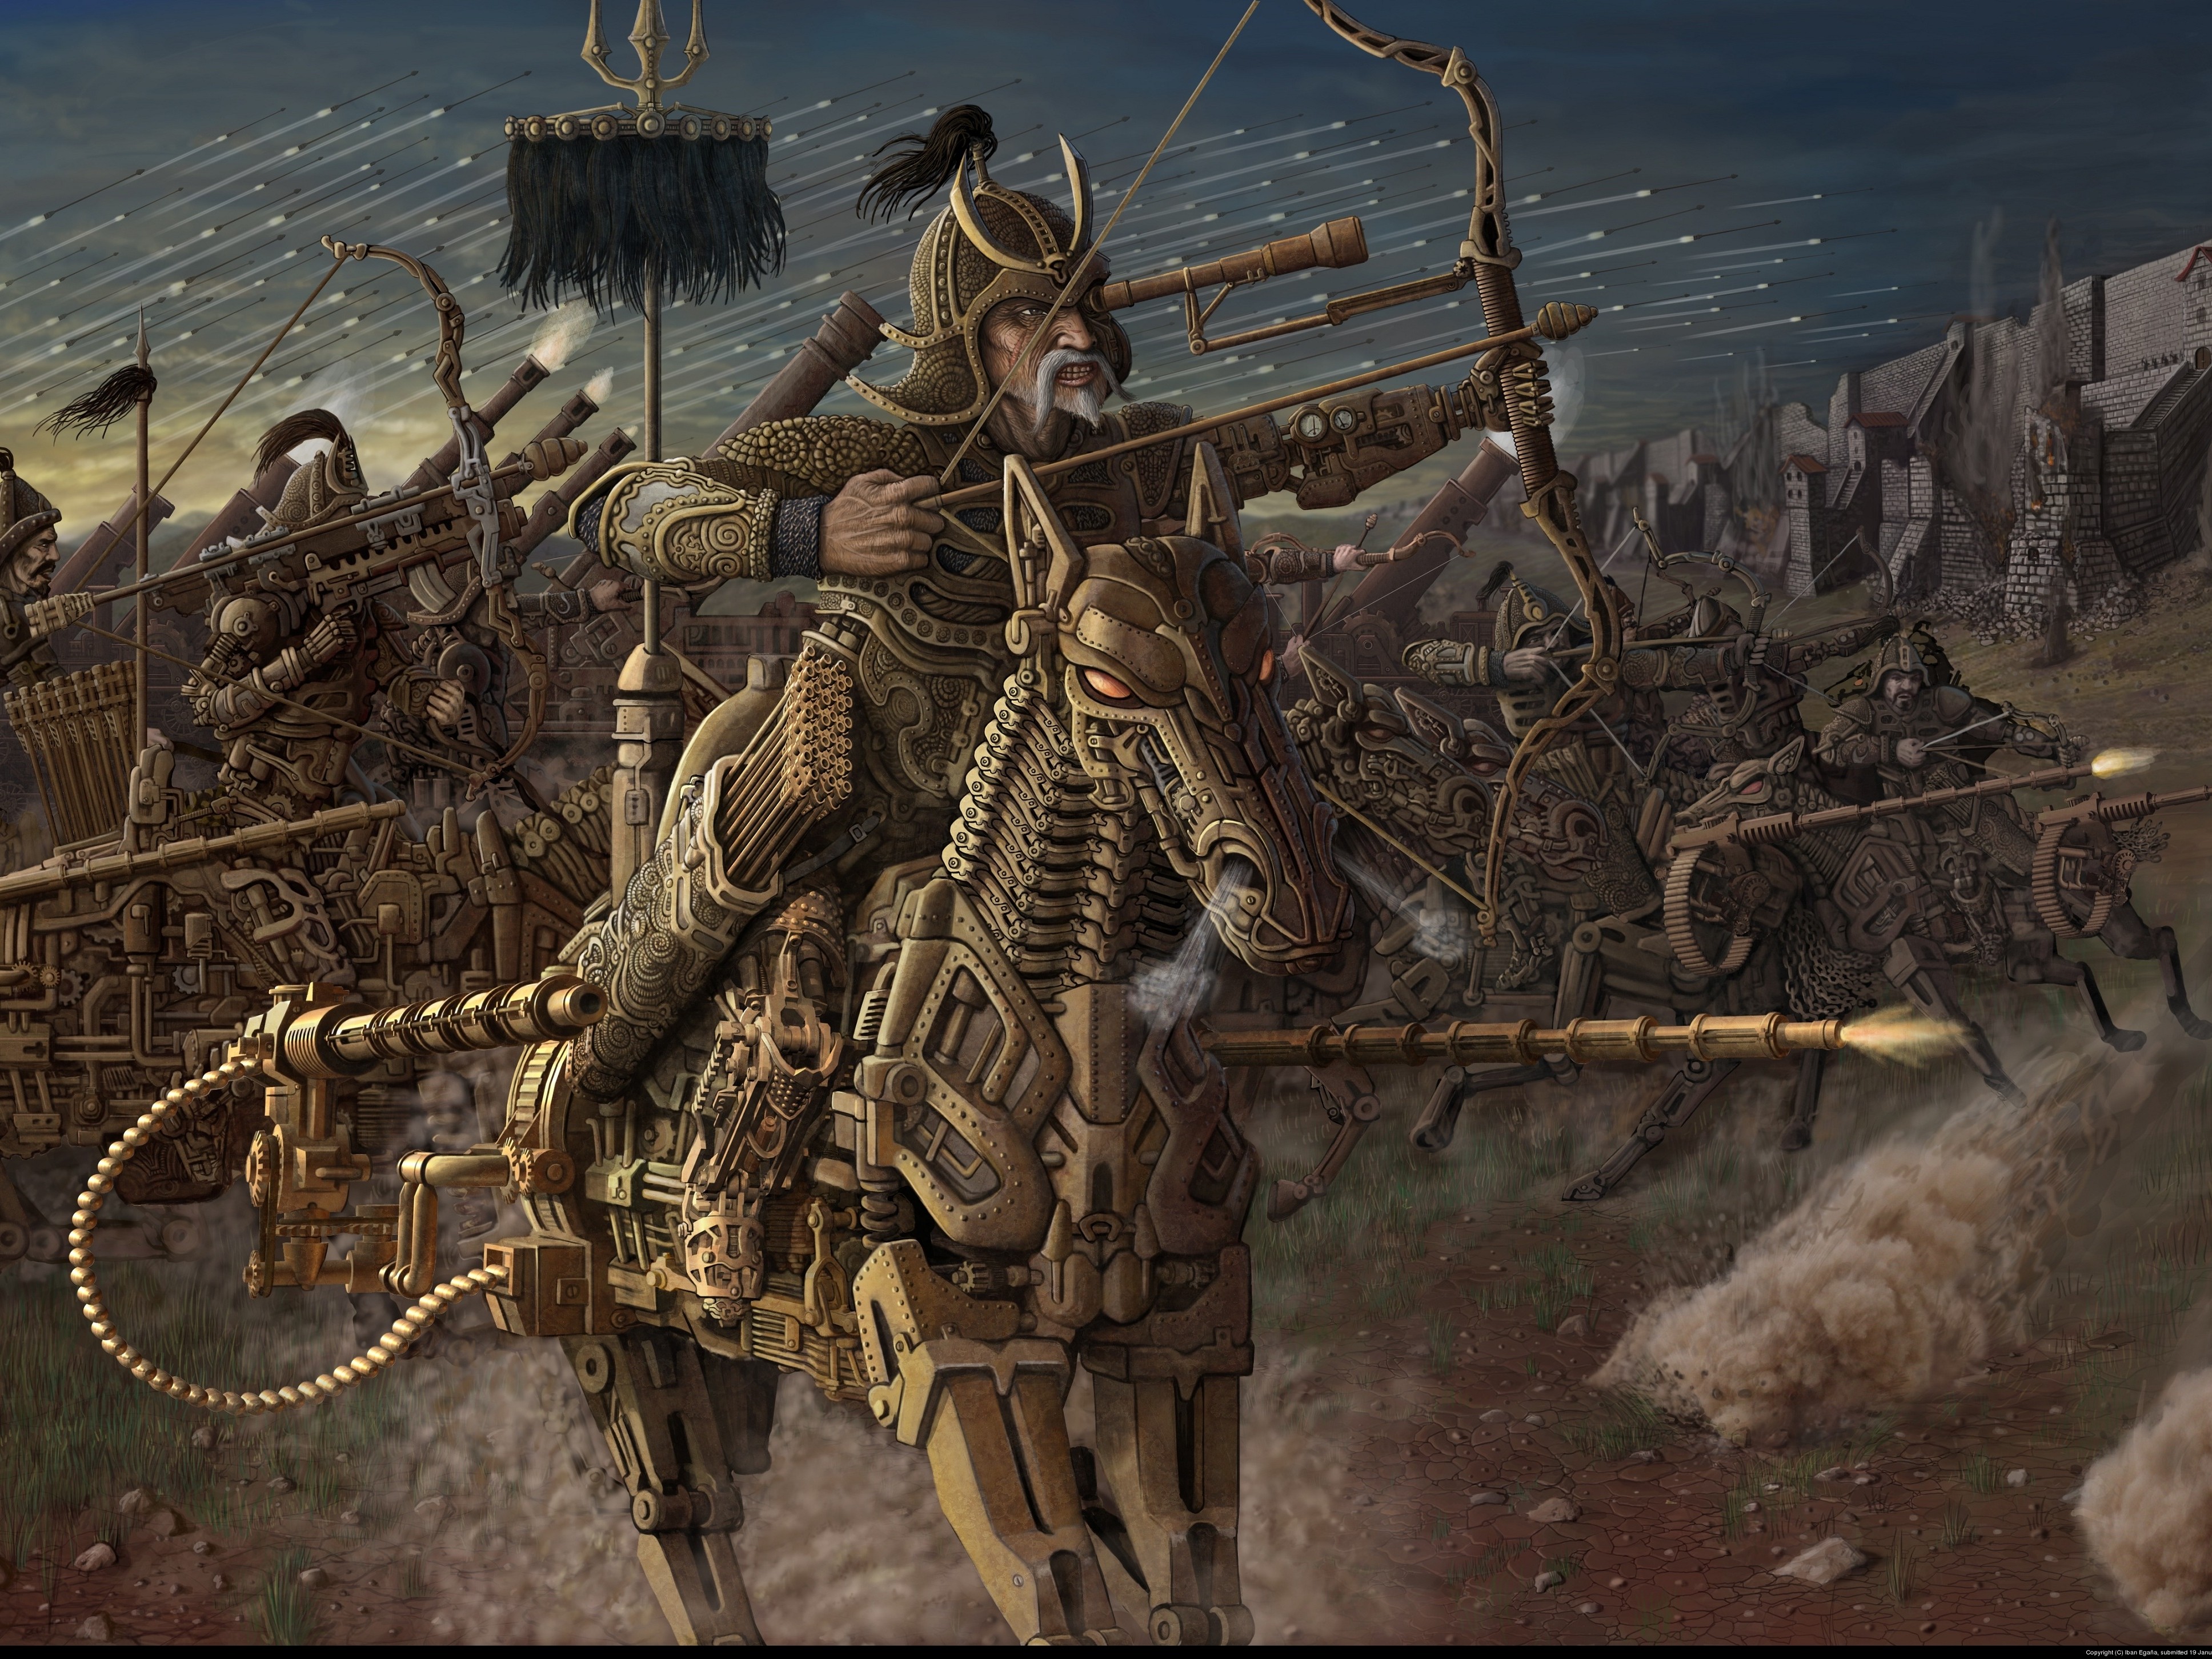 General 3872x2904 ancient old warrior horse fantasy art weapon machine arrows war soldier bow Mongols wall digital art building smoke bow and arrow watermarked aiming